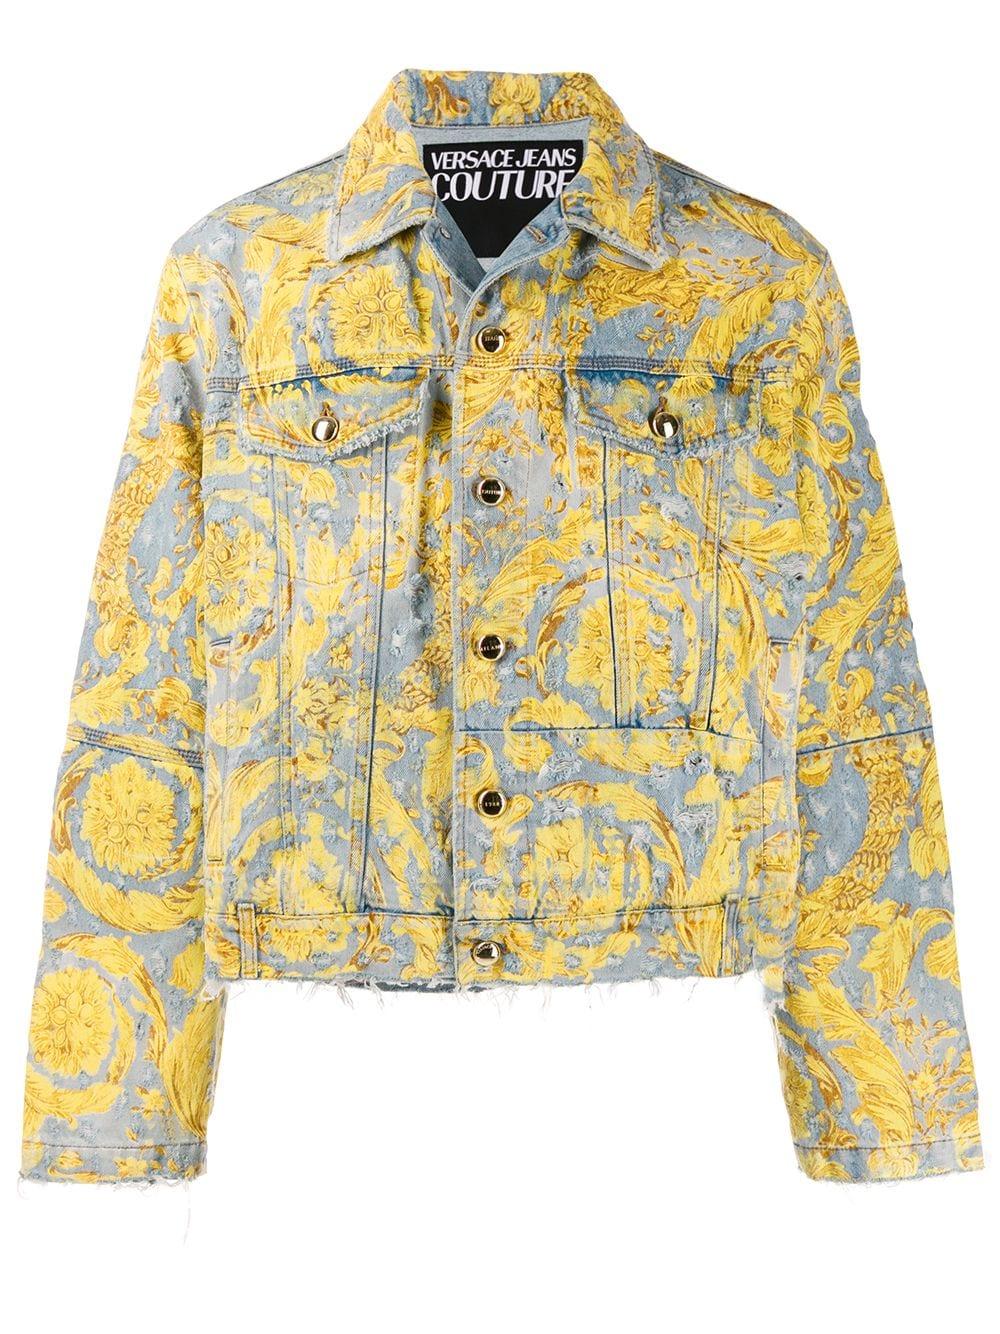 Versace Jeans Couture Baroque Print Denim Jacket in Blue for Men - Lyst